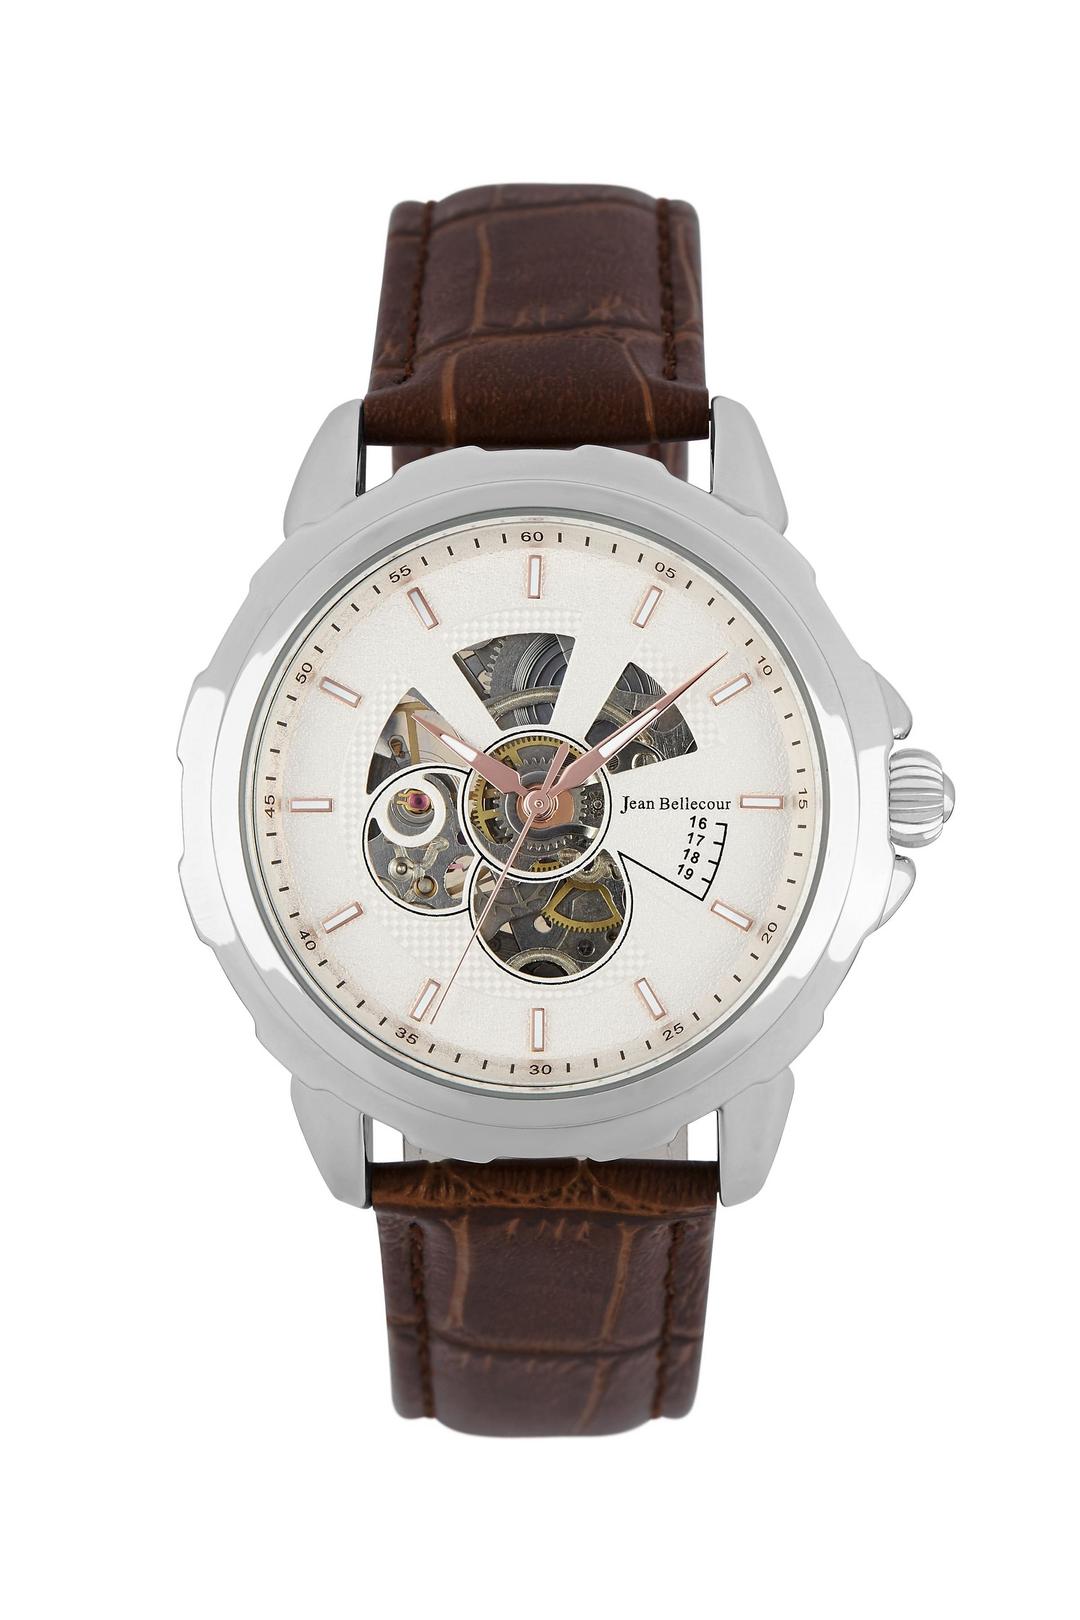 Jean Bellecour 40mm Automatic Analog Gents Leather Watch (JBP1912) - Brown